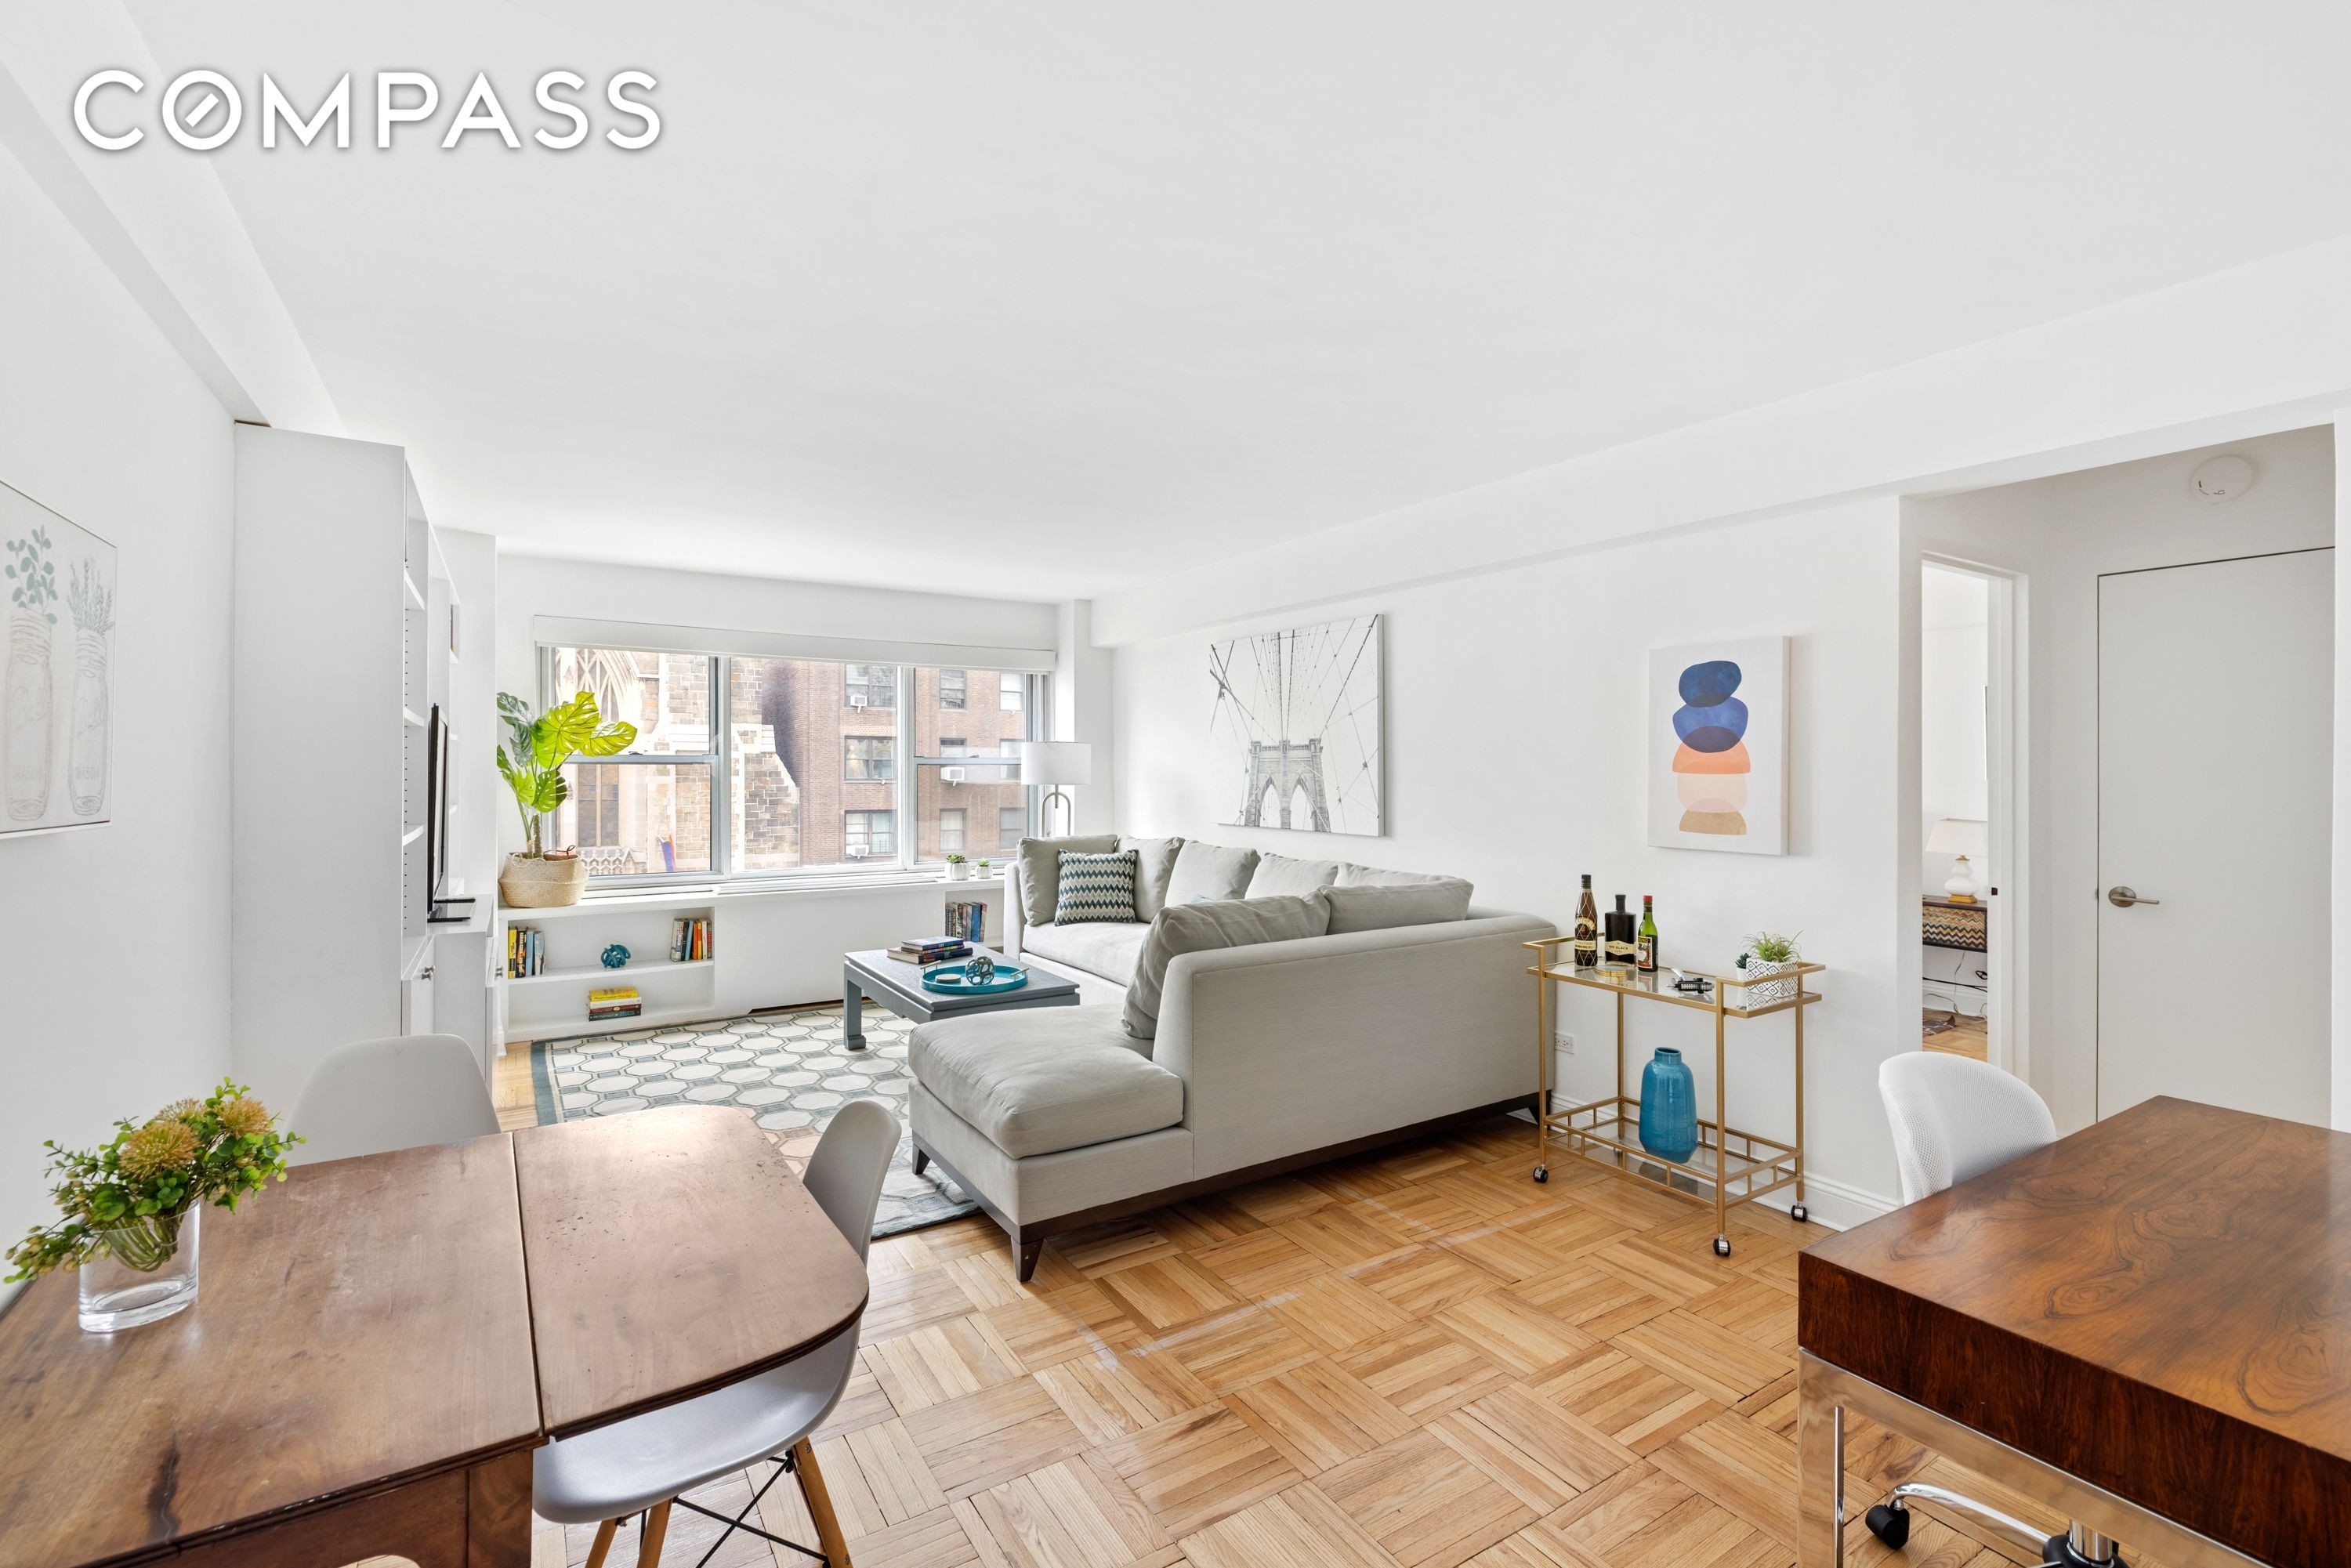 Co-op Properties for Sale at The Cambridge House, 175 W 13TH ST, 3E West Village, New York, New York 10011